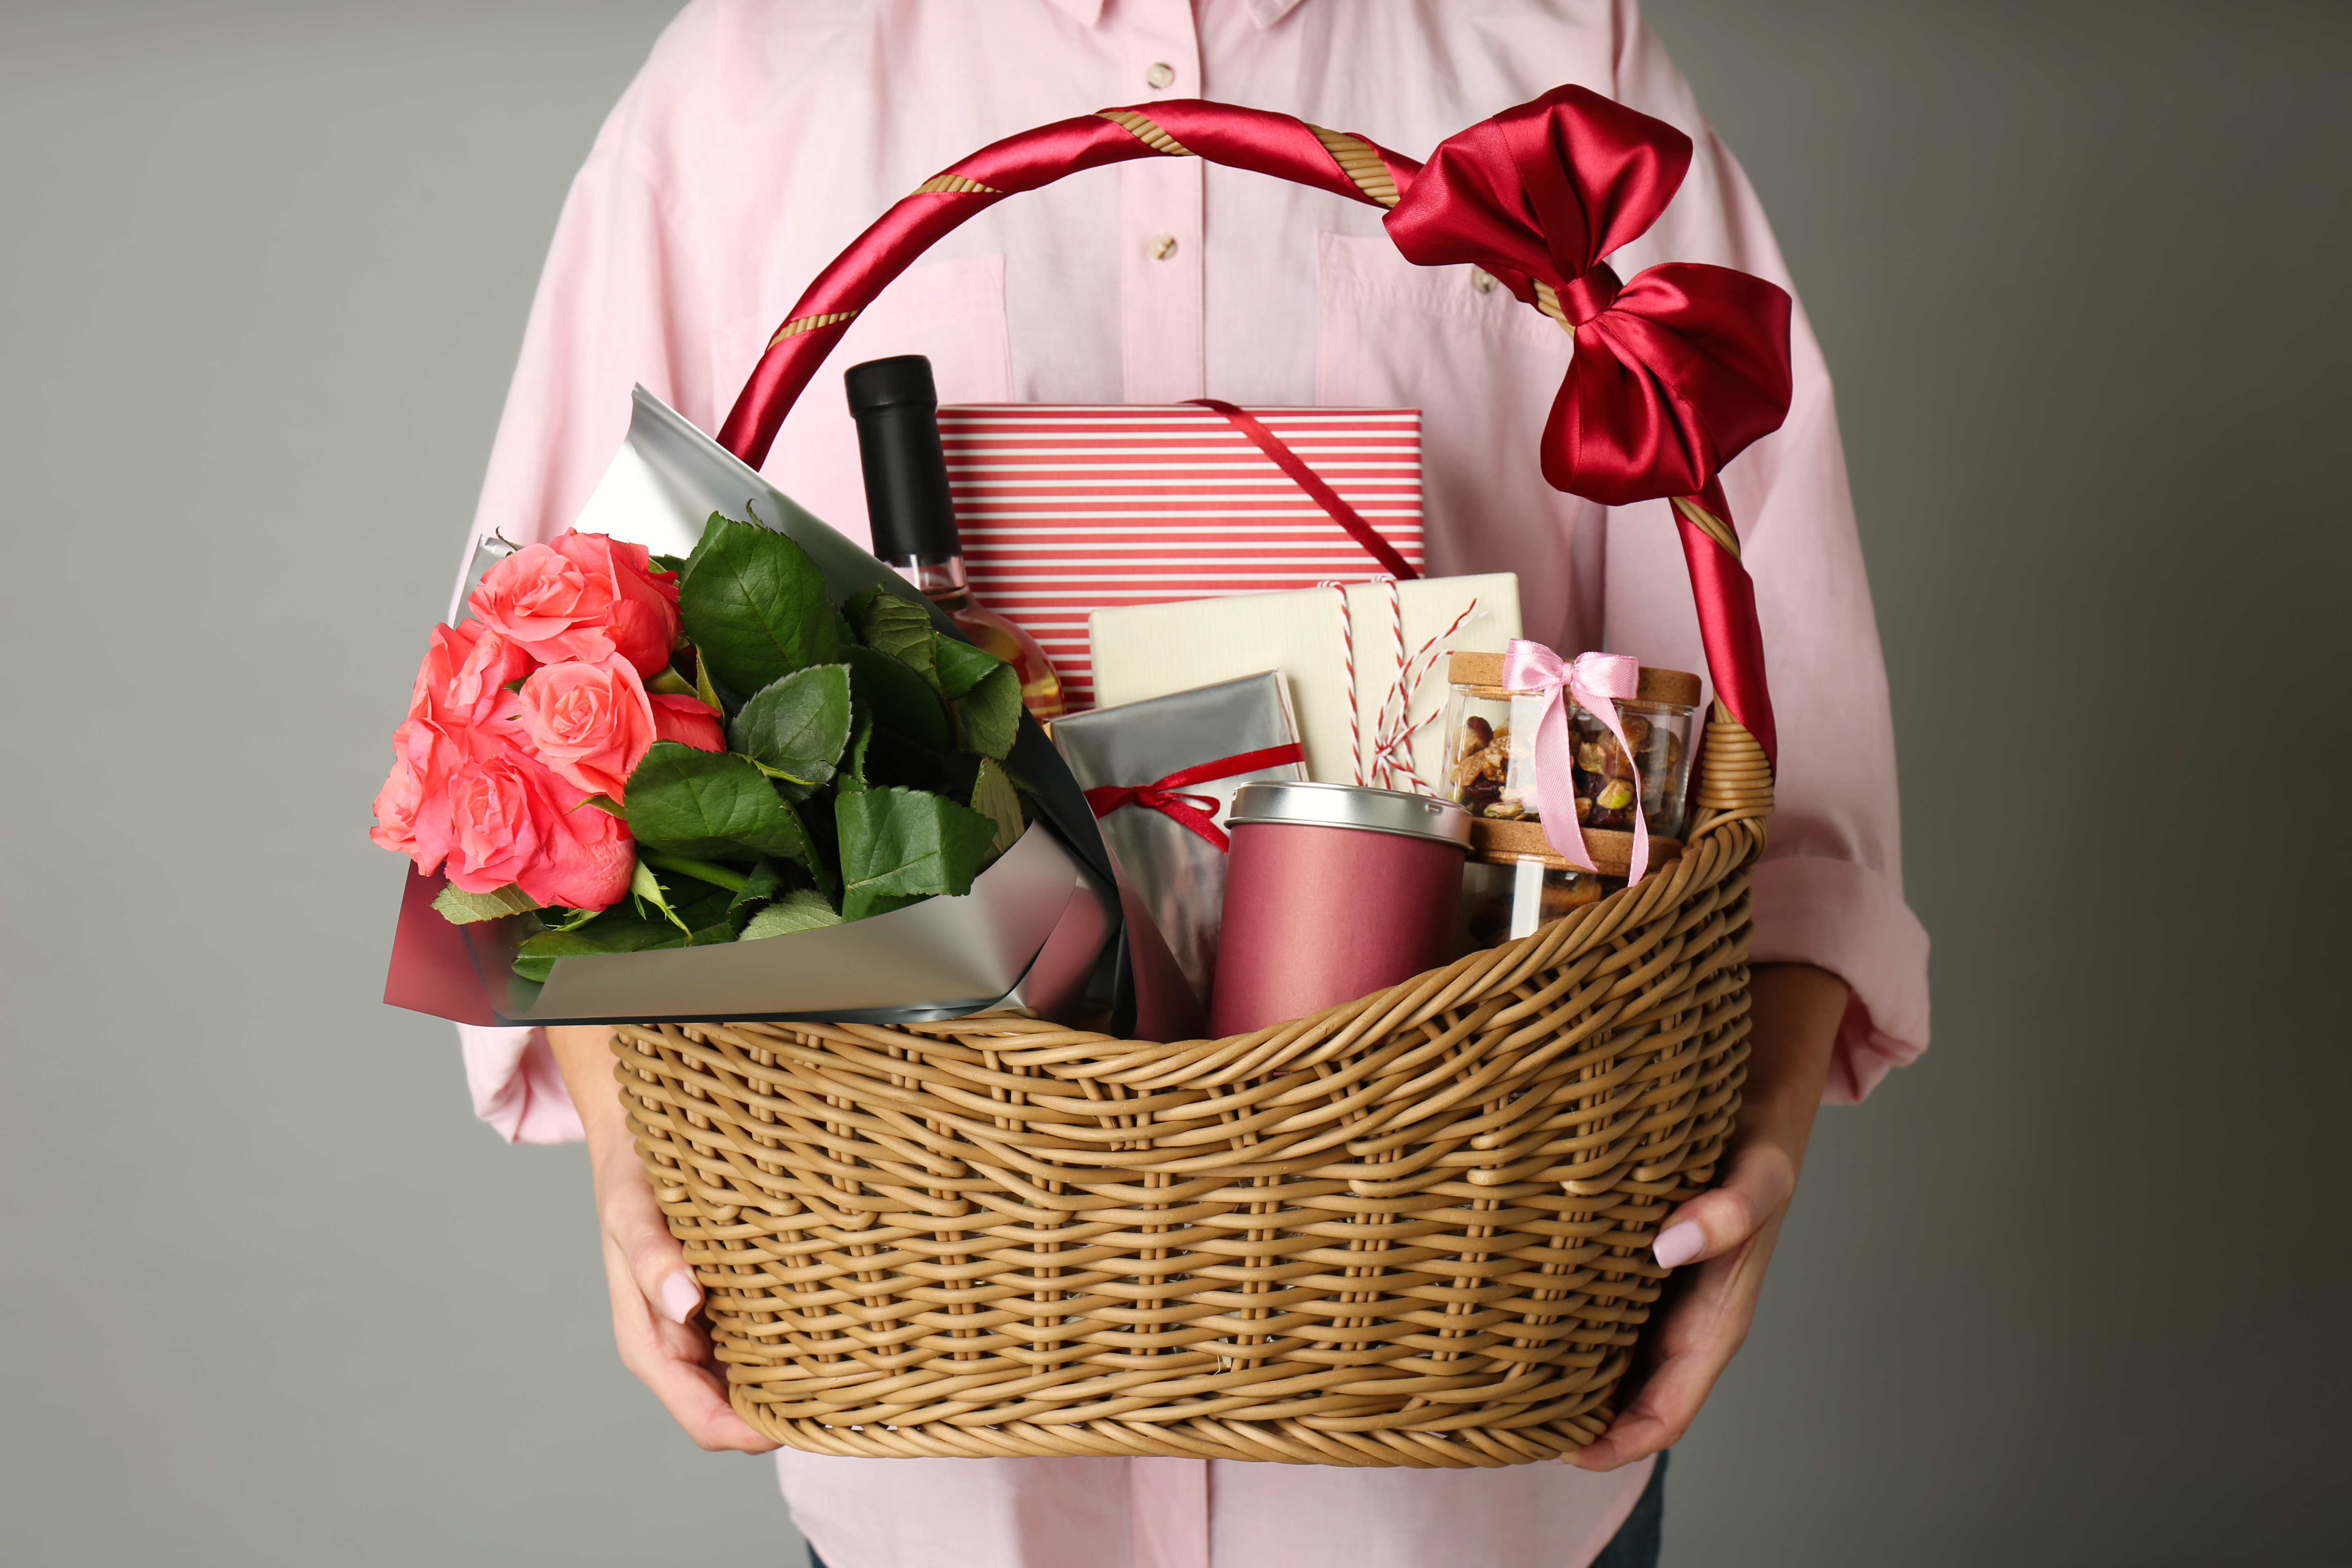 A woman holding a basket full of gifts | Source: Shutterstock